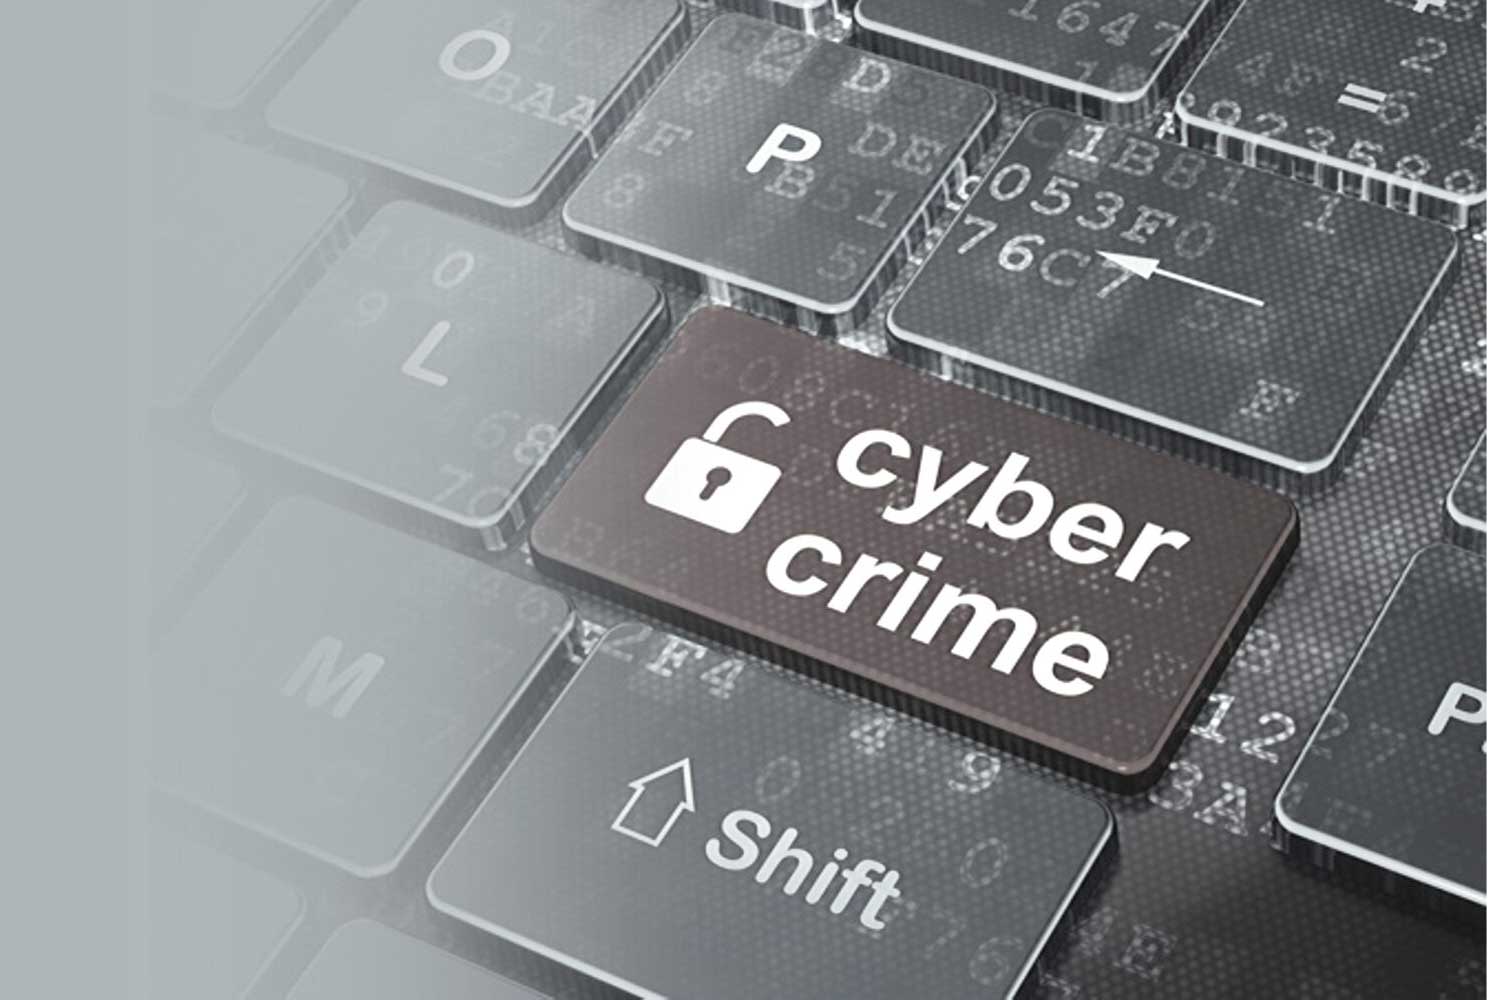 Directory of U.S. State and Local Cybercrime Law Enforcement